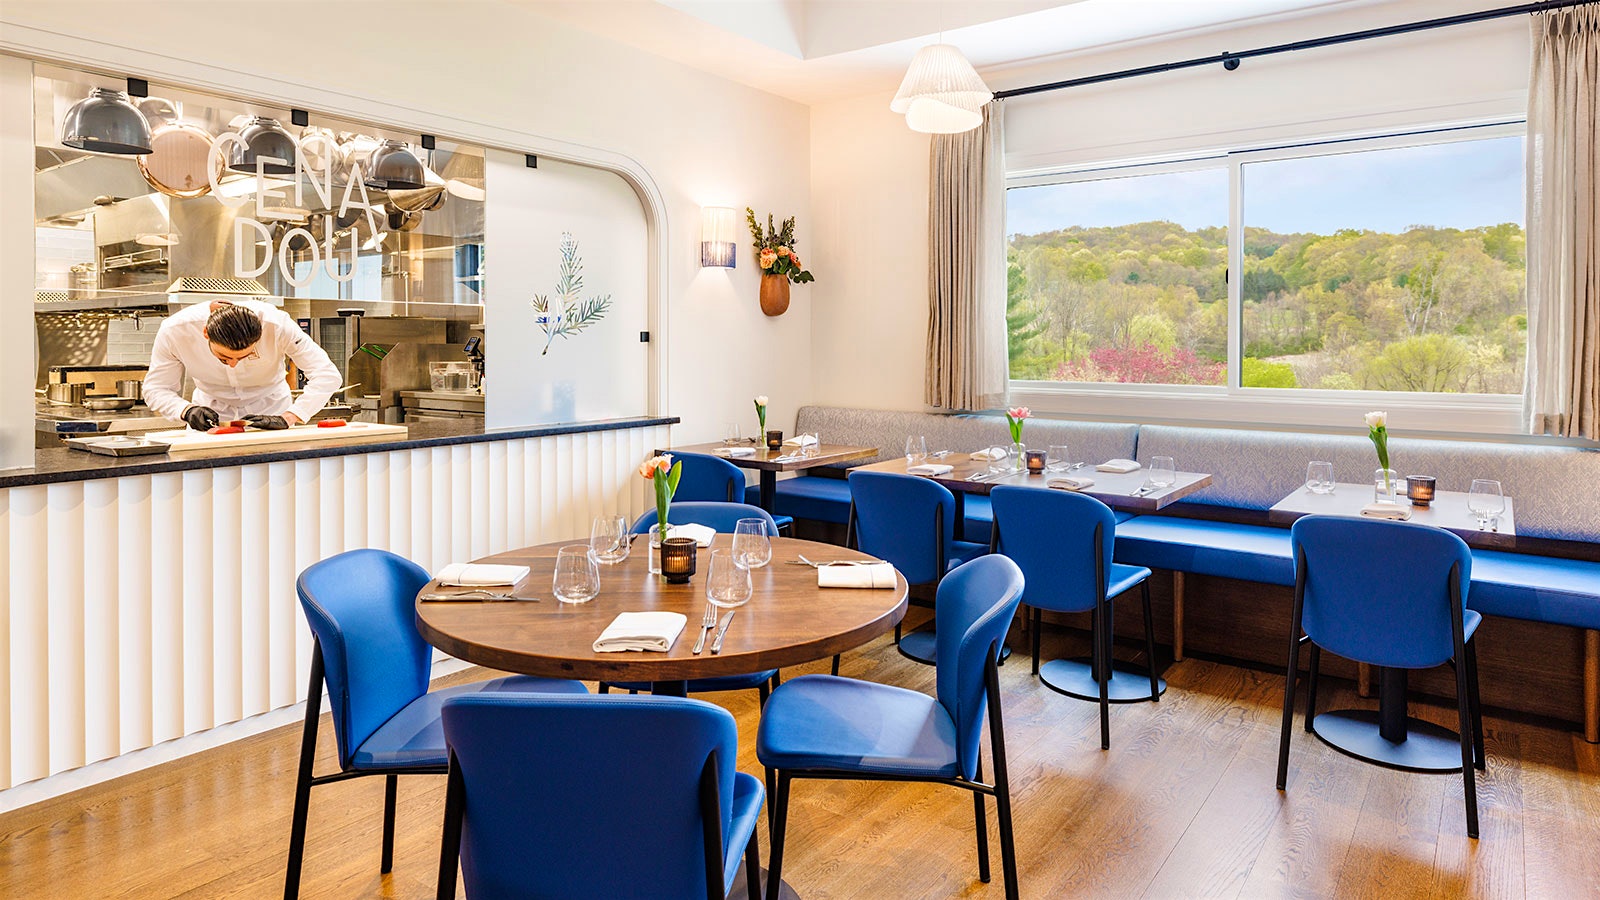  The dining room of Cenadou Bistrot, with a glassed-walled open kitchen, bright blue chairs and a view of forested hills out the window